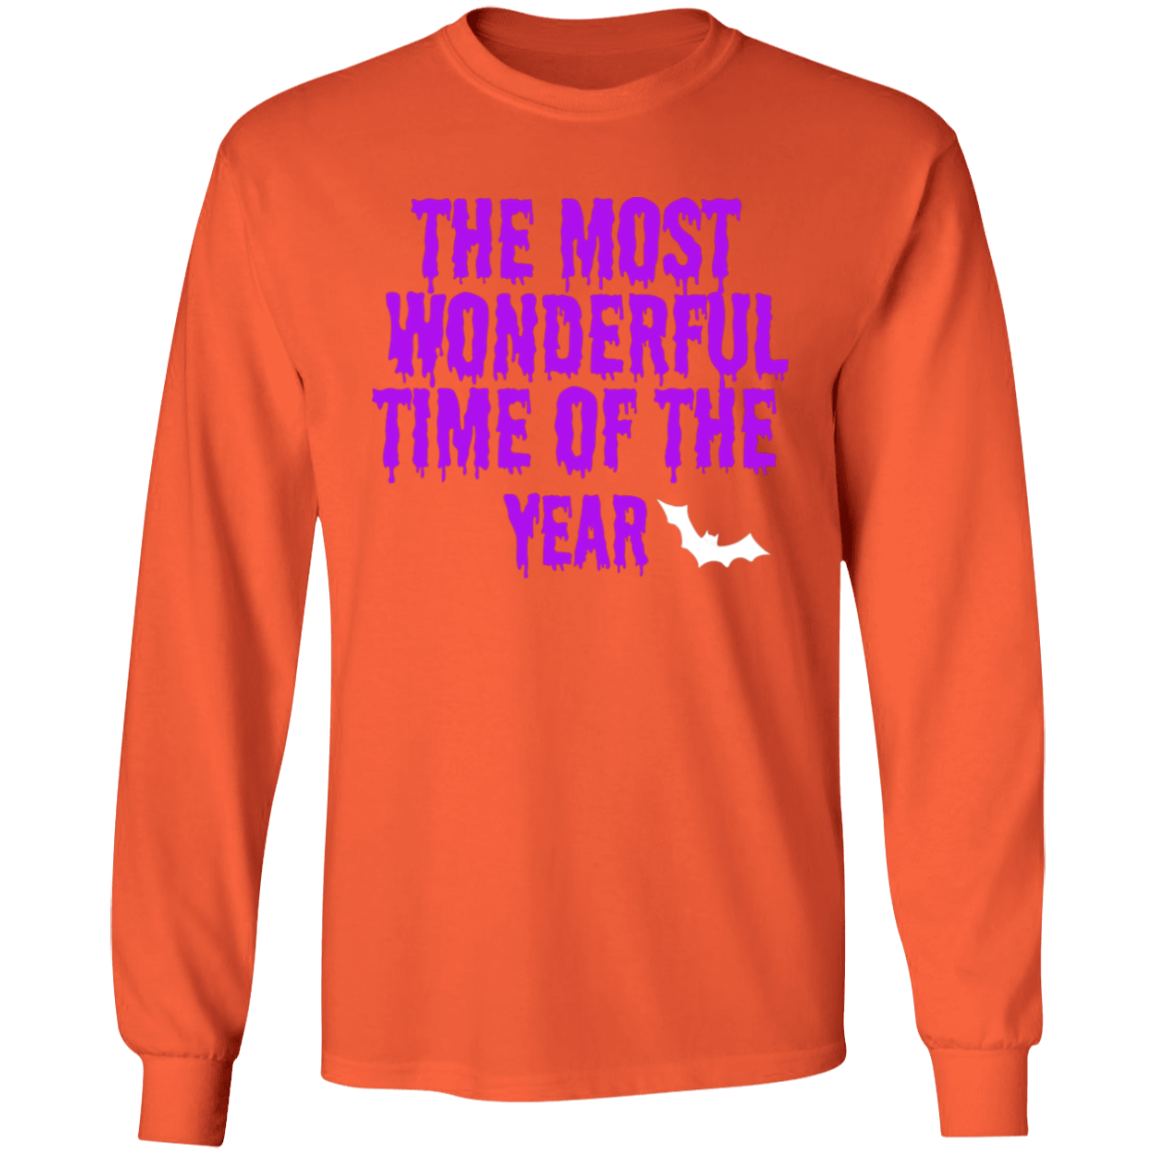 Most Wonderful Time of the Year LS T-Shirt